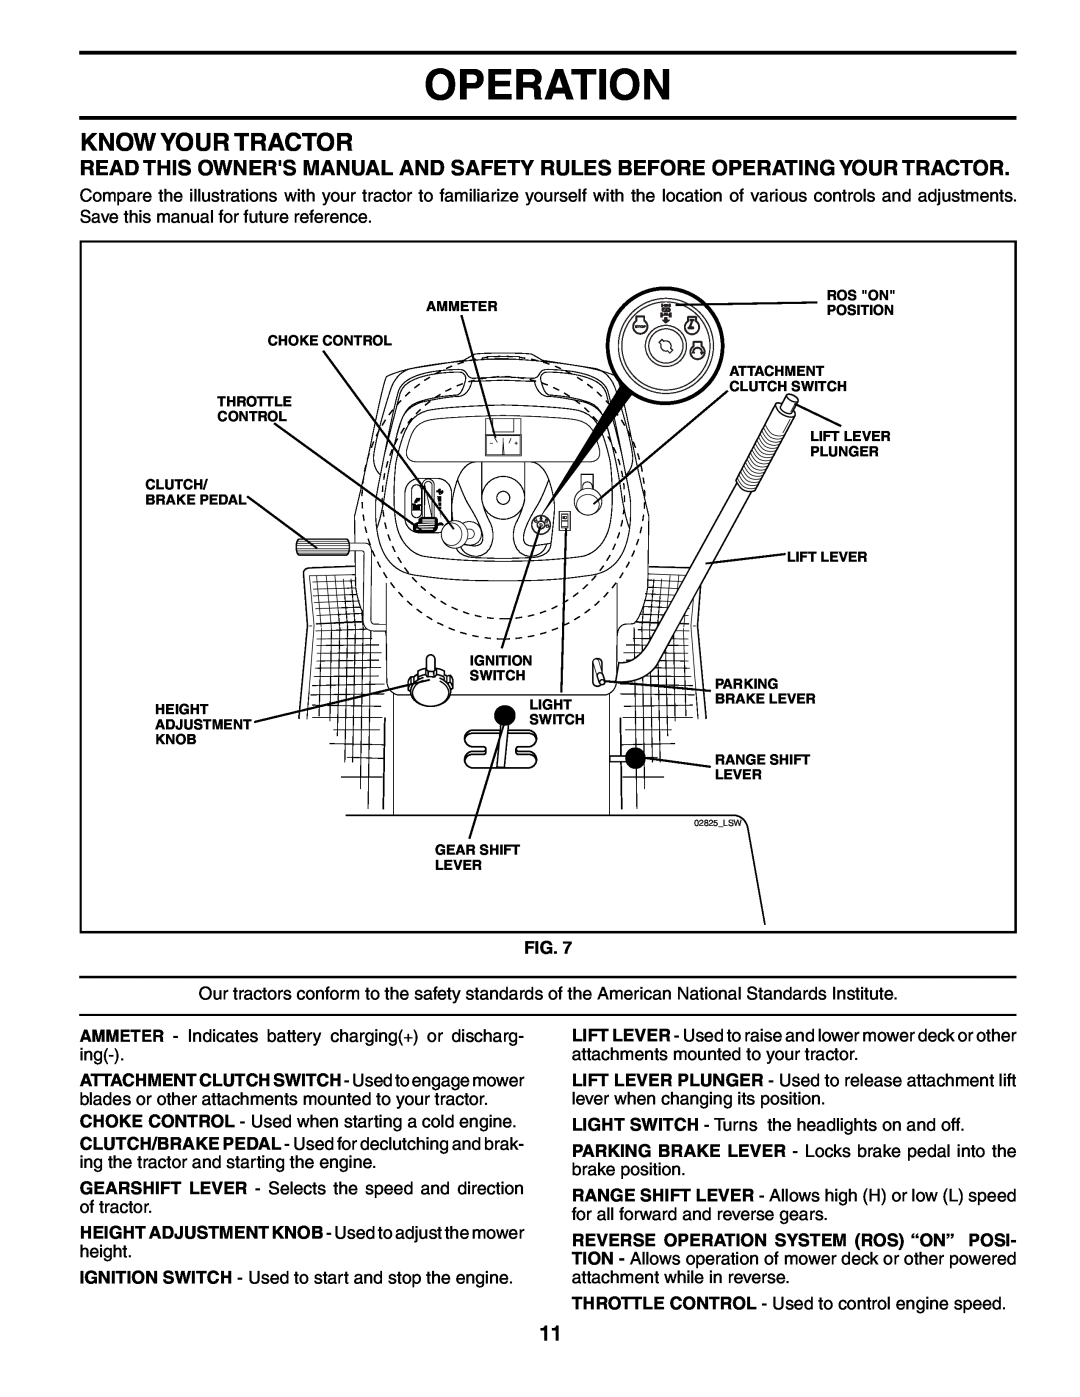 Husqvarna GT2254 owner manual Know Your Tractor, Operation, HEIGHT ADJUSTMENT KNOB - Used to adjust the mower height 